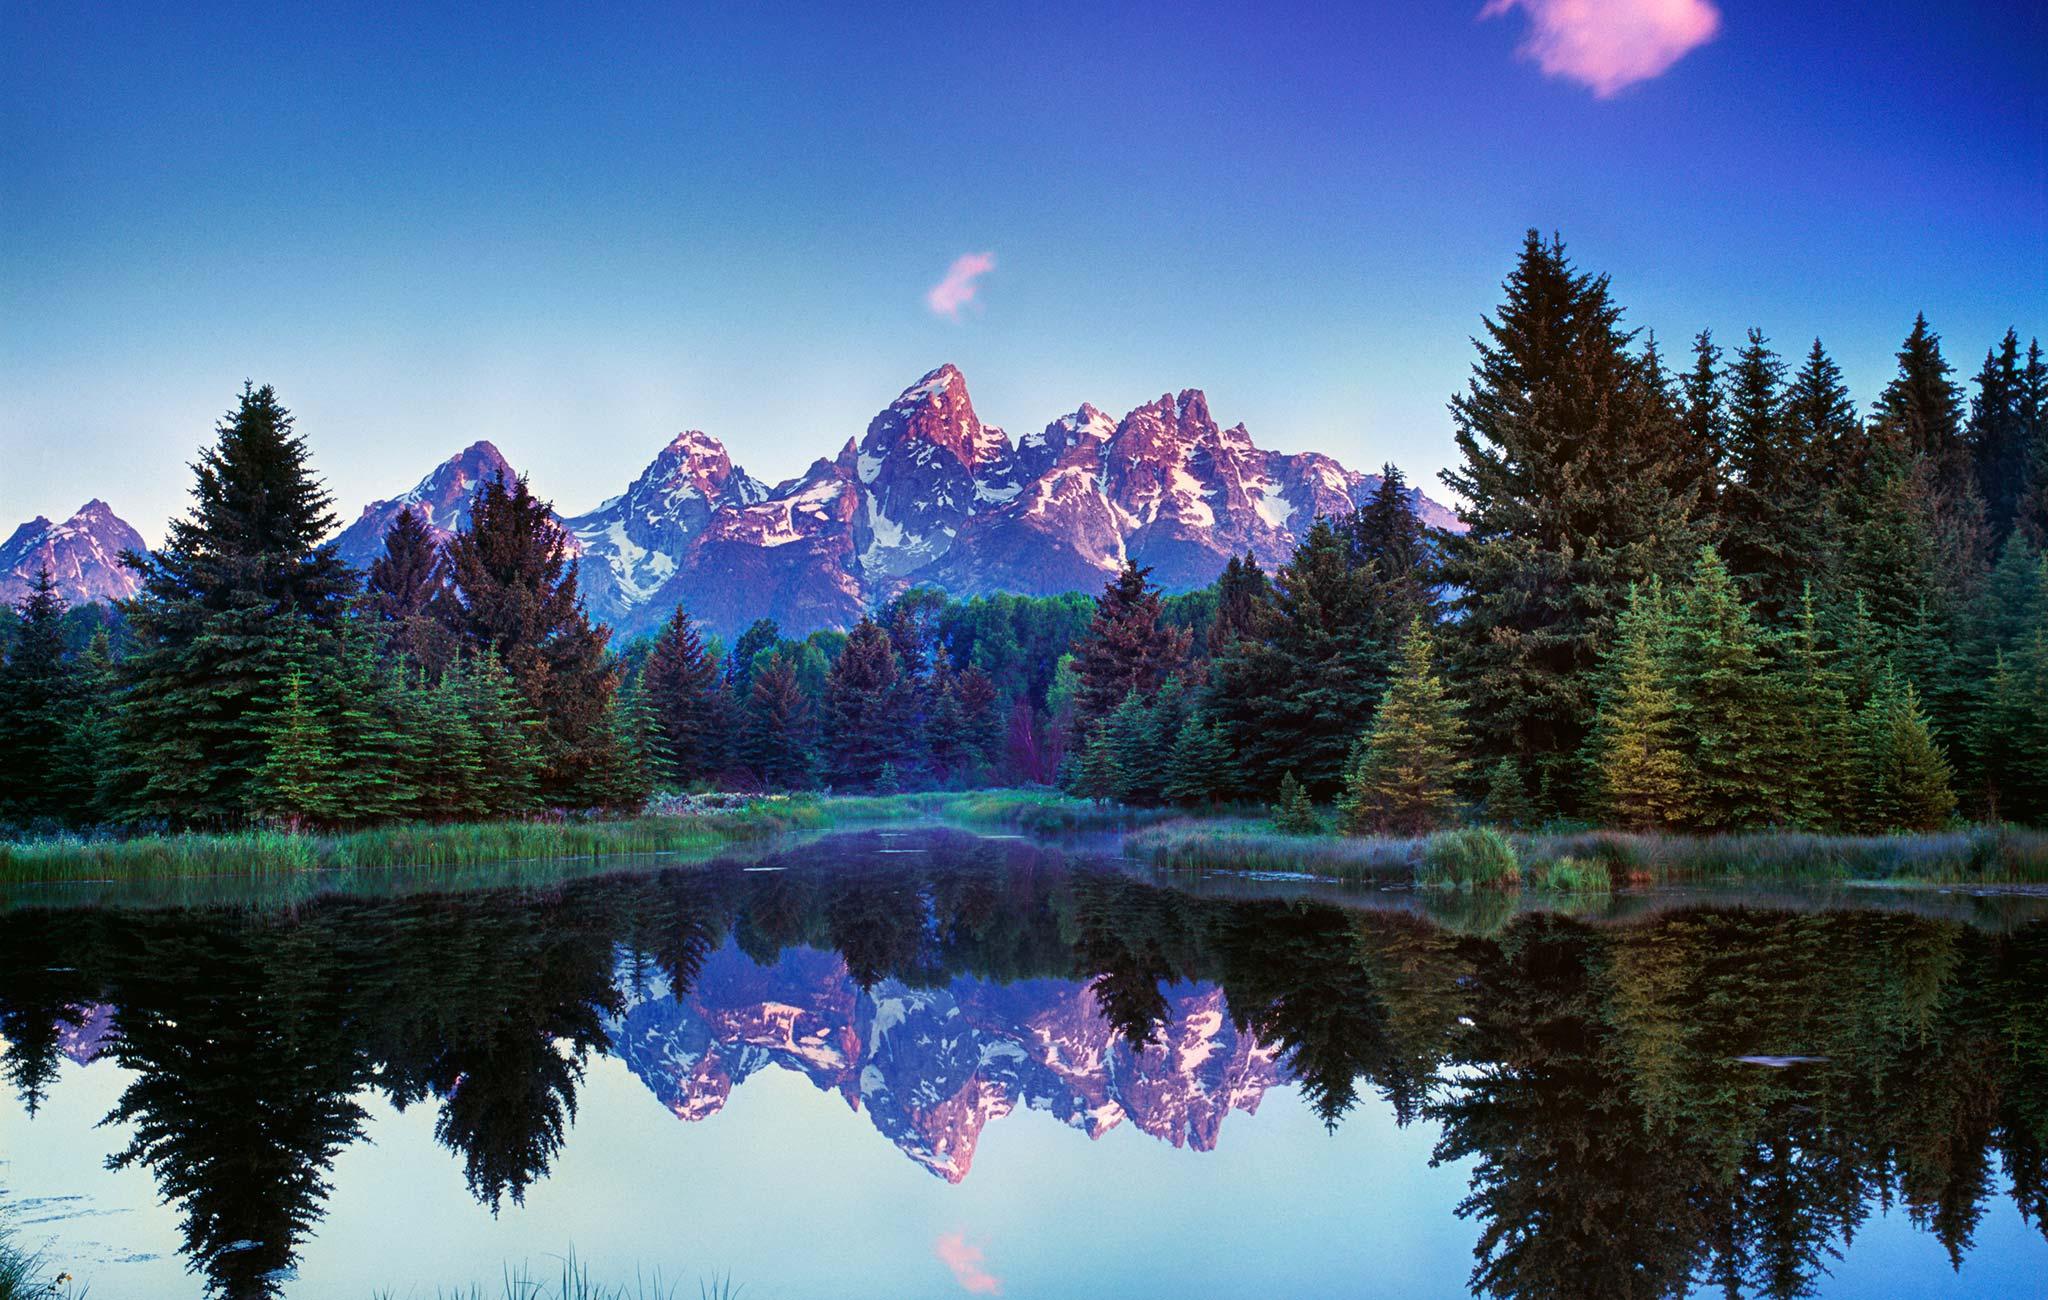 Grand Tetons Wallpaper Image Photos Pictures Background